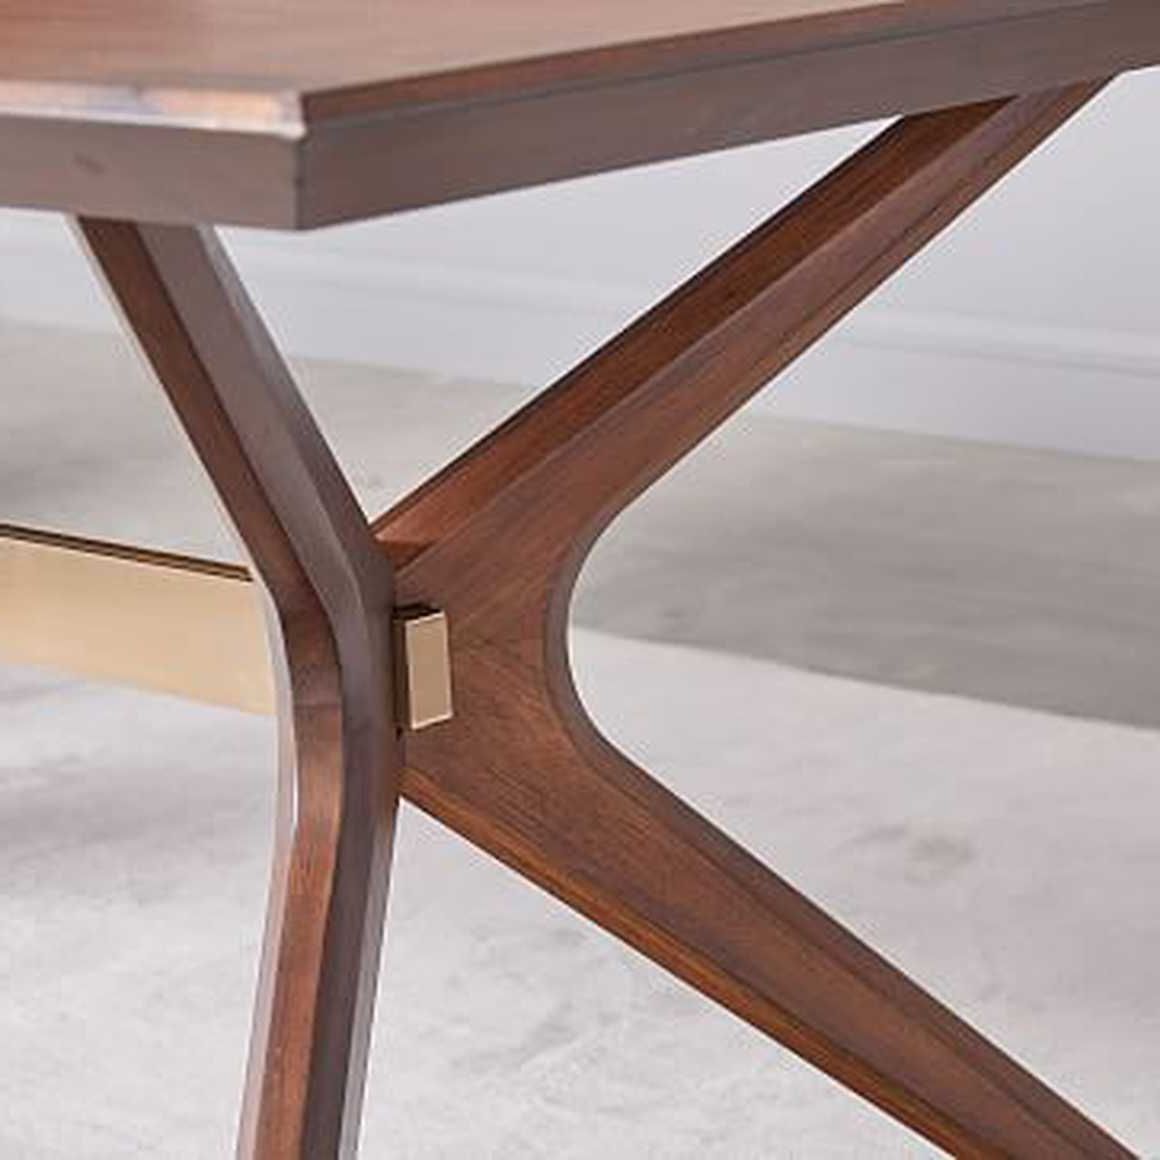 Wright Dining Table, 72', Dark Walnutwest Elm In 2019 For Best And Newest West Dining Tables (View 22 of 25)